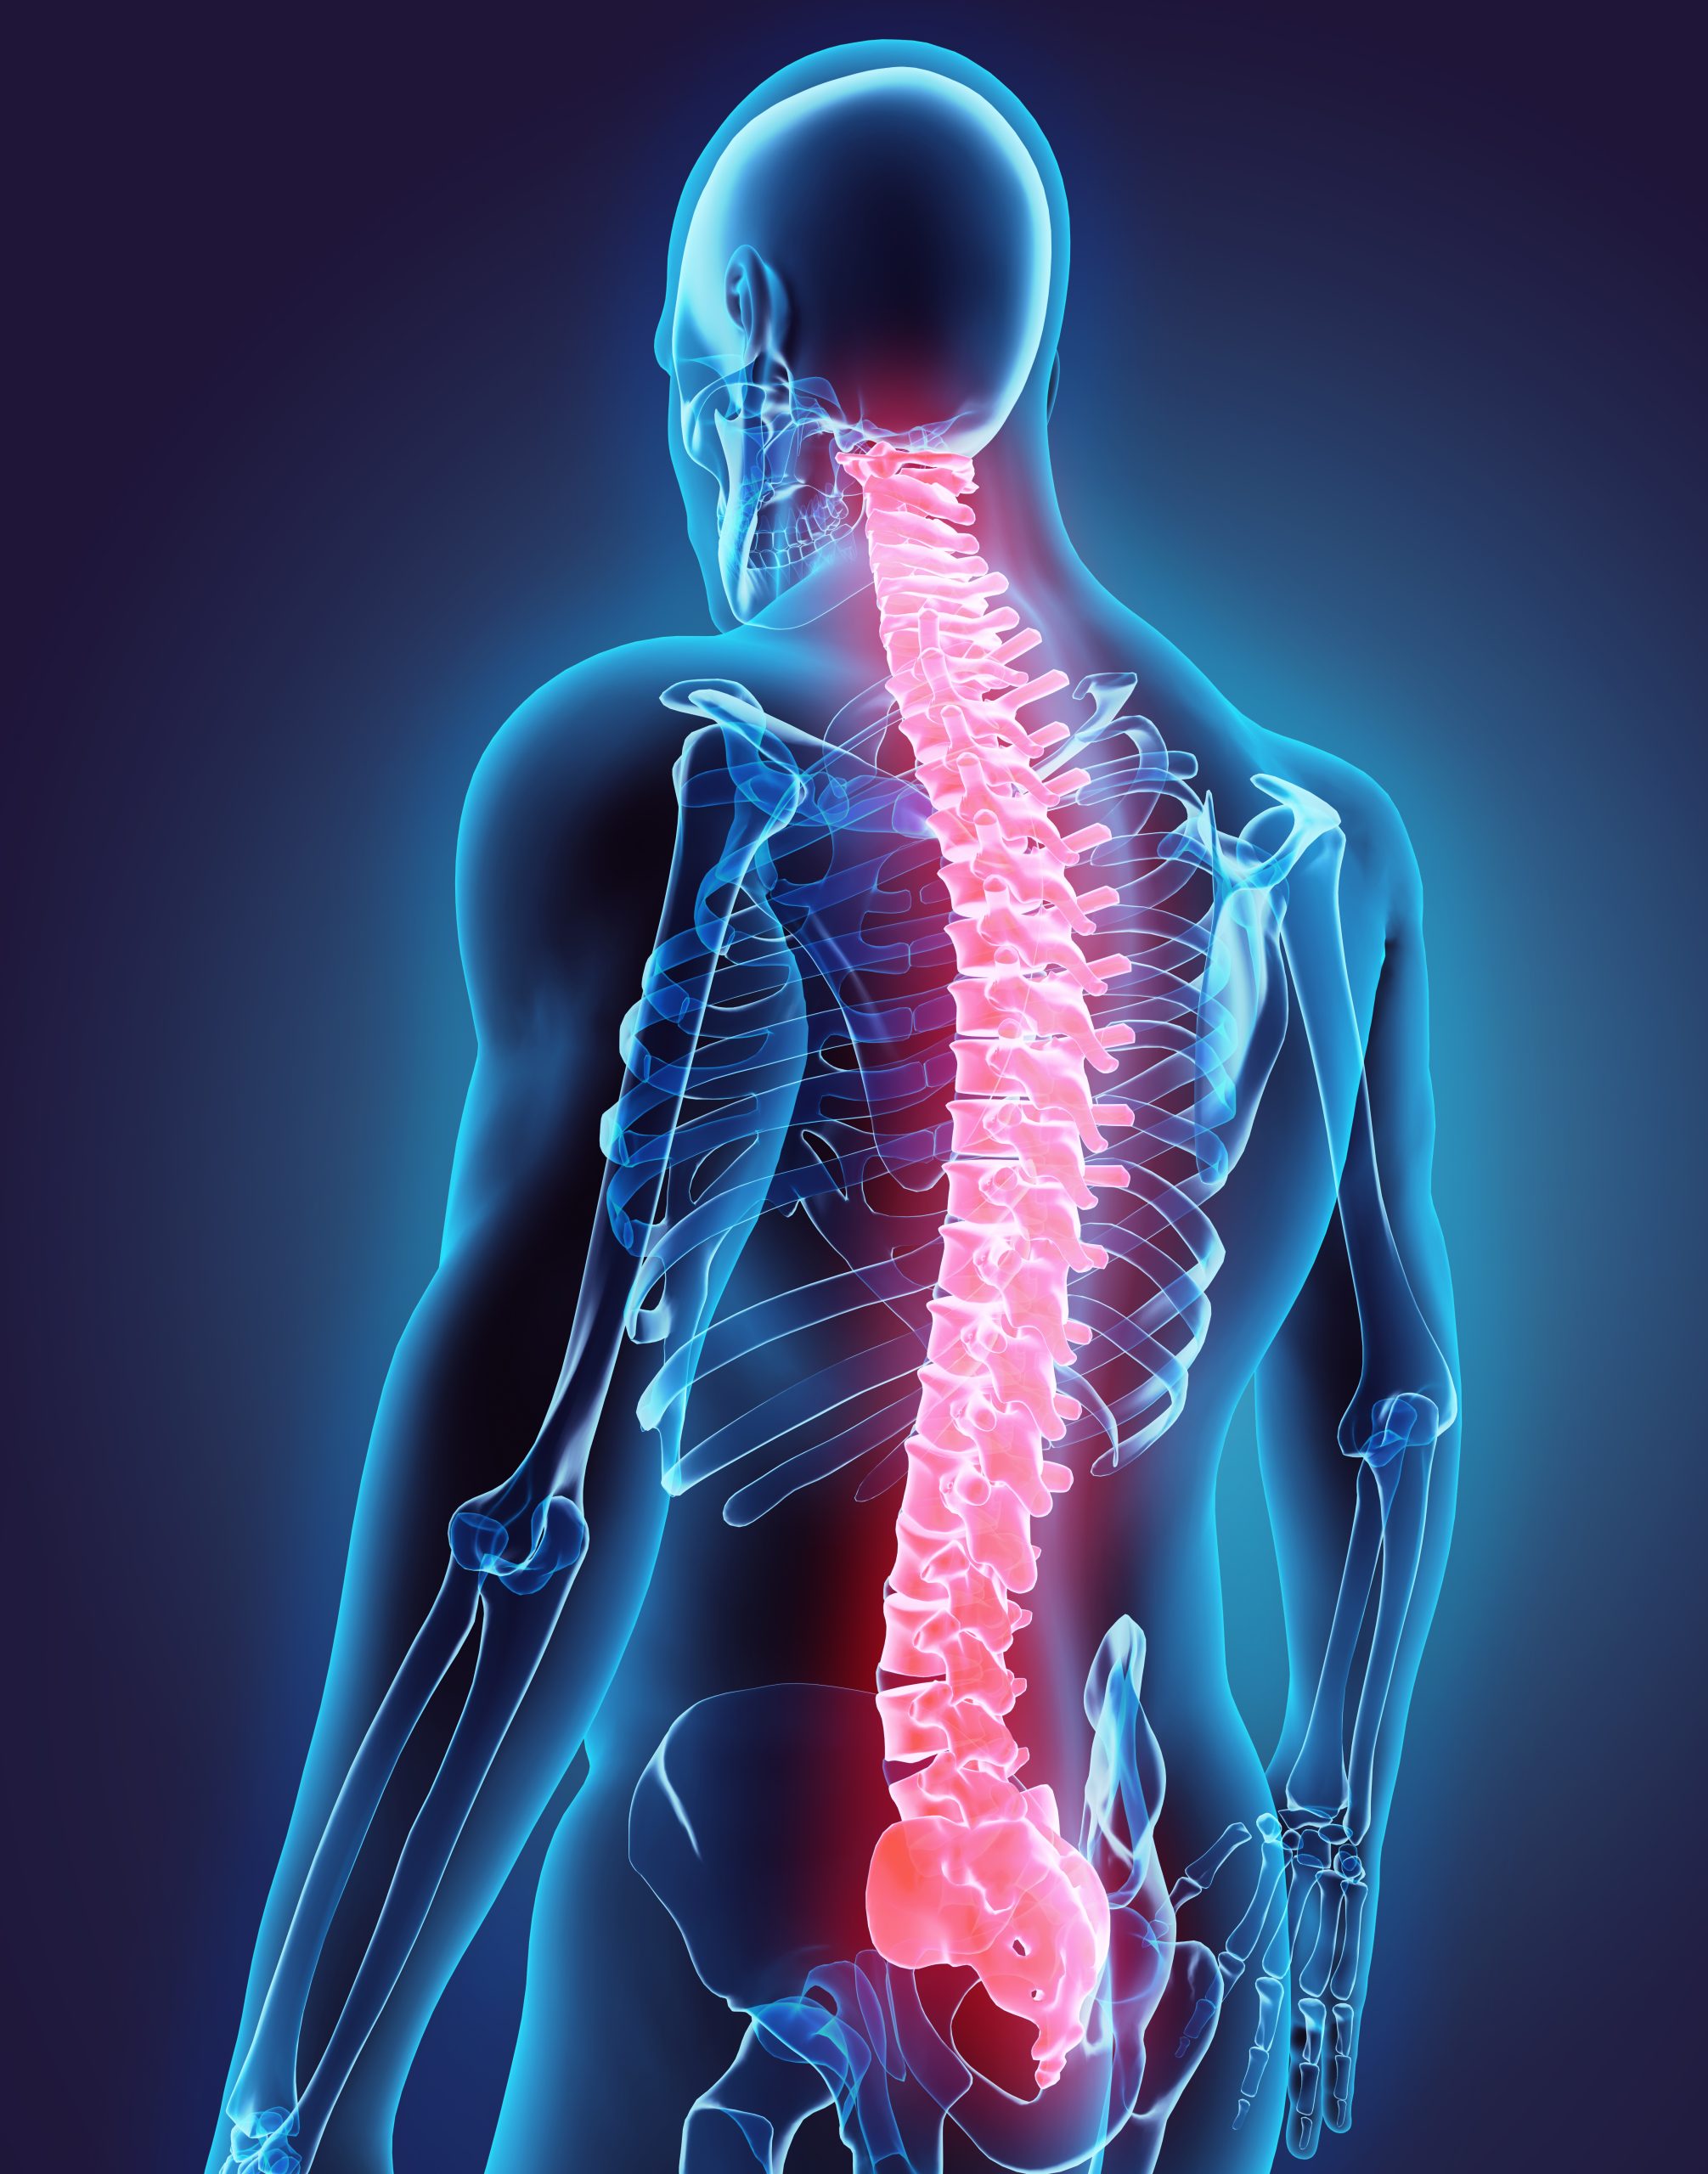 Physical Therapy in our clinic for Pain Care Spinal Cord Stimulators